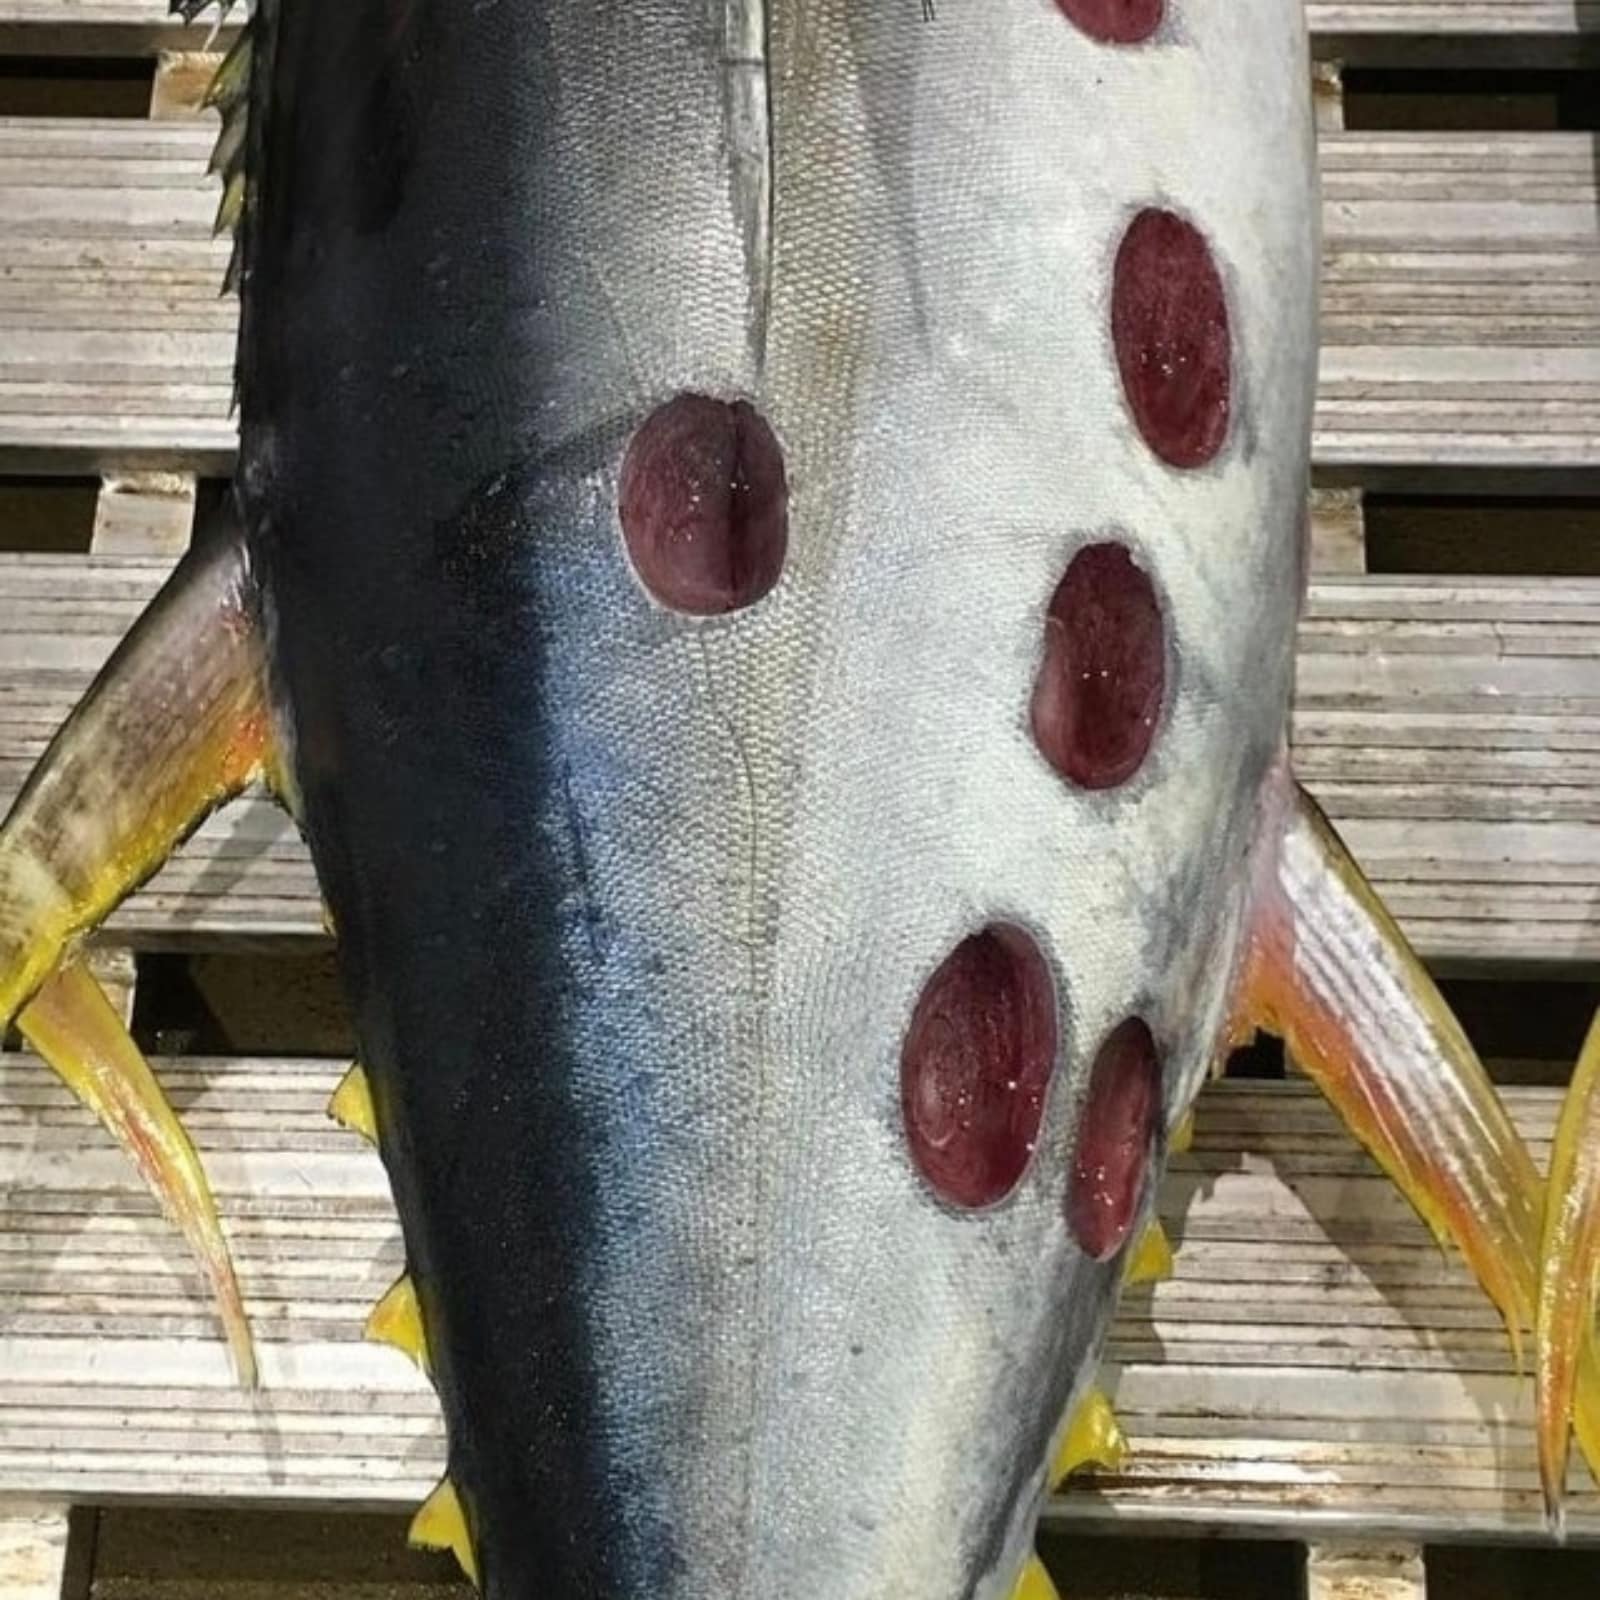 Strange Fish With Round Wounds Baffles Social Media Users - News18